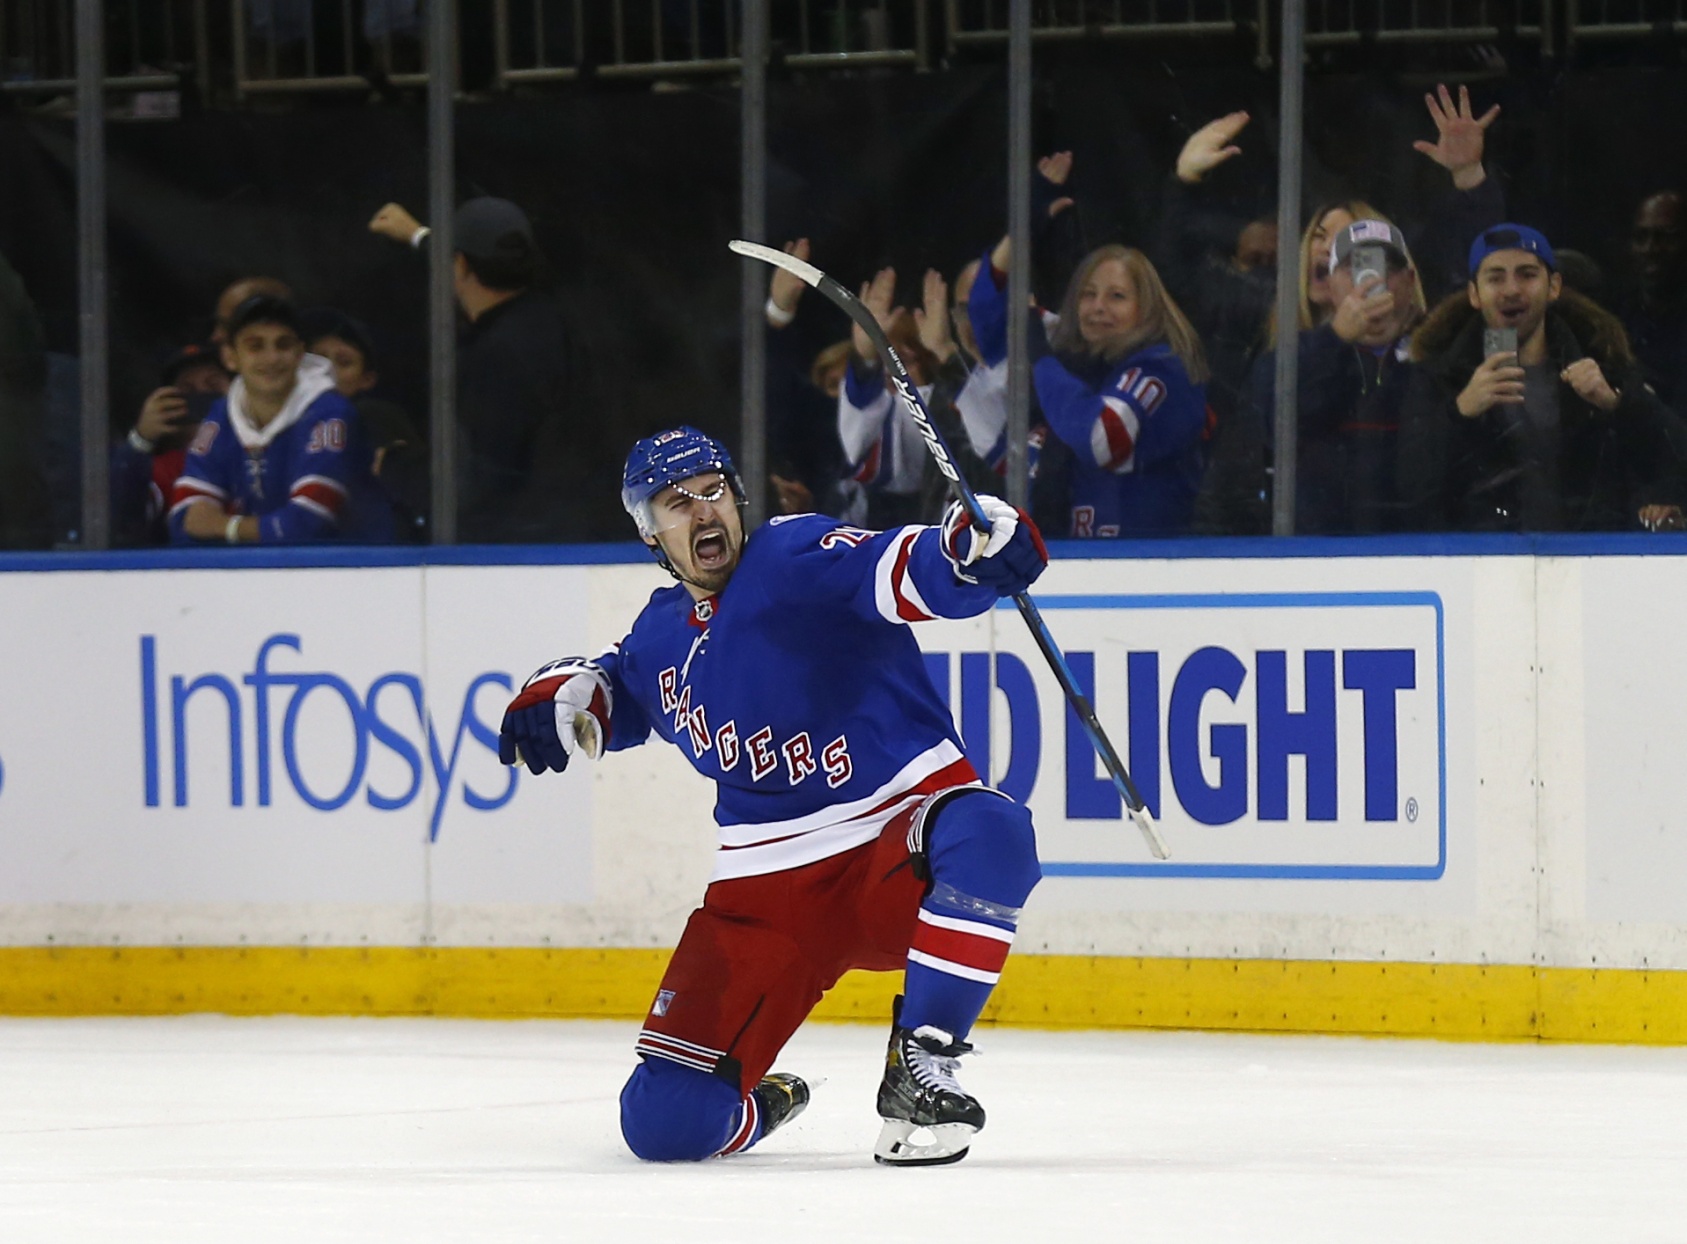 Rangers coach says Devils 'played their best game of the series' to claim  3-2 lead